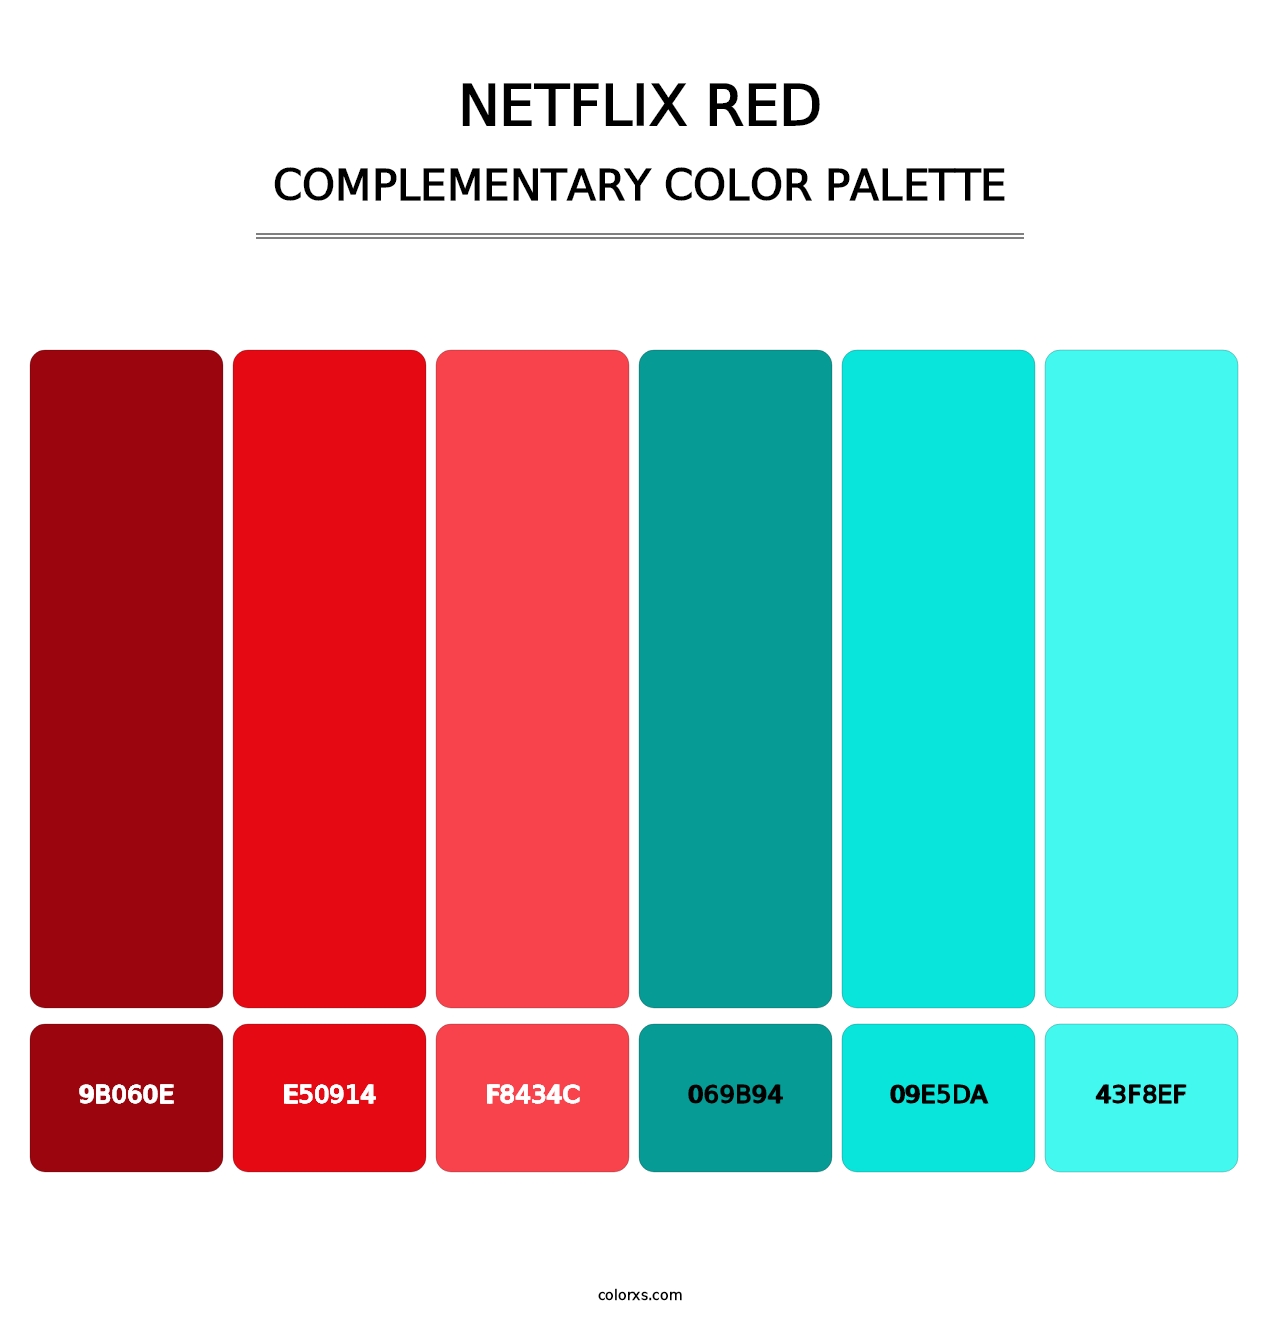 Netflix Red - Complementary Color Palette